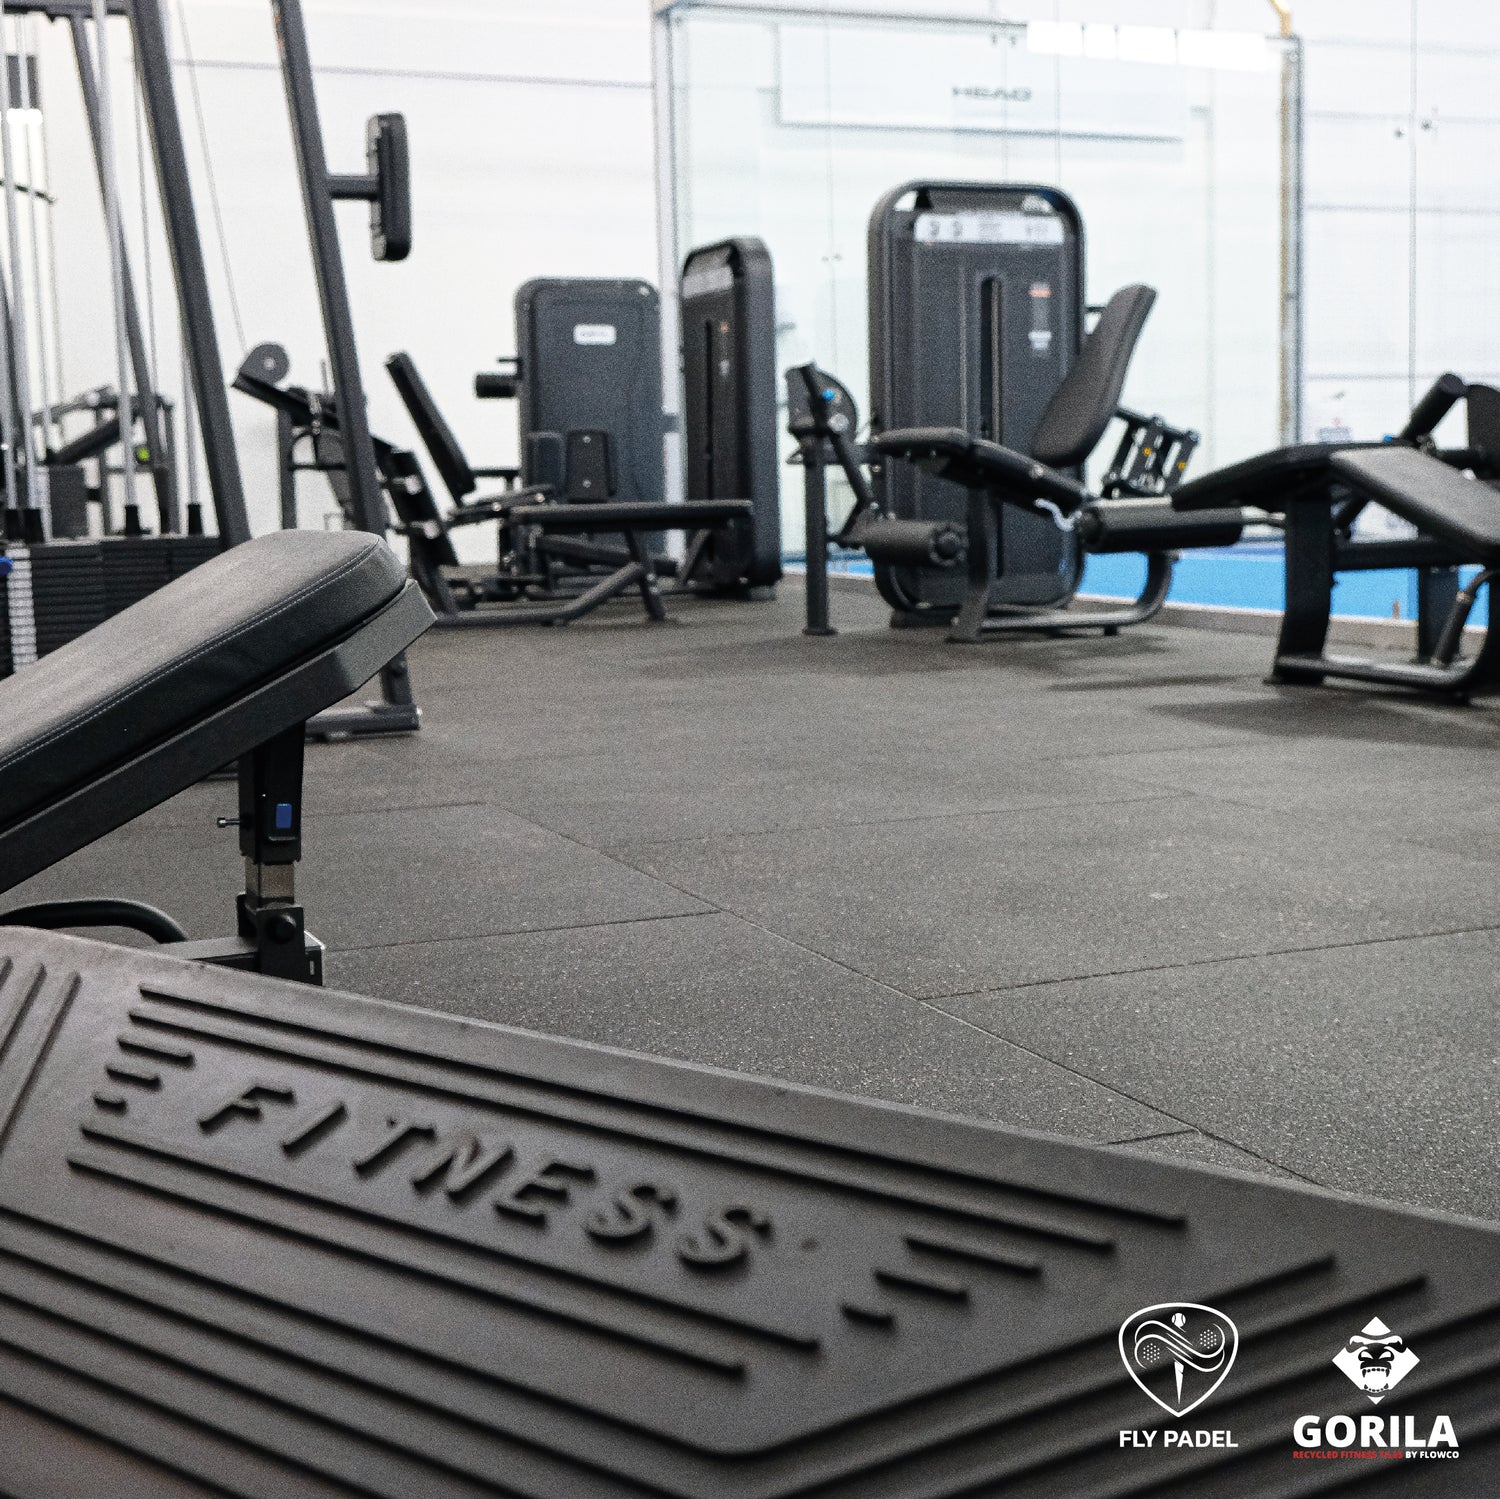 Extremely durable, non-slip and functional, our flooring is suitable for high traffic training areas in gyms, fitness clubs and CrossFit. Ecological products made in Portugal.